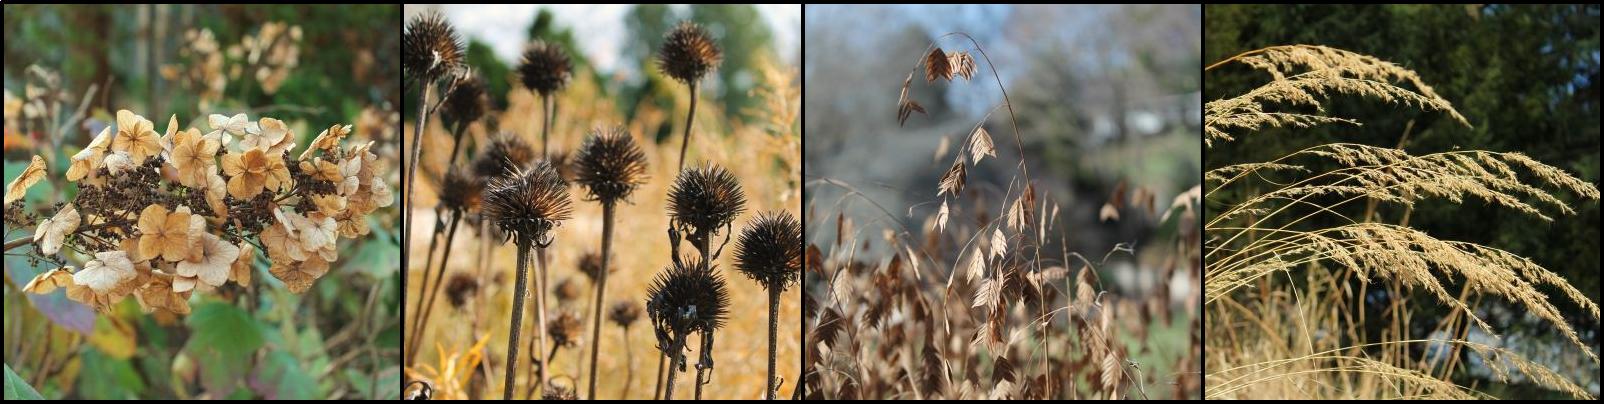 Dry flowers and seeds to decorate with in the winter